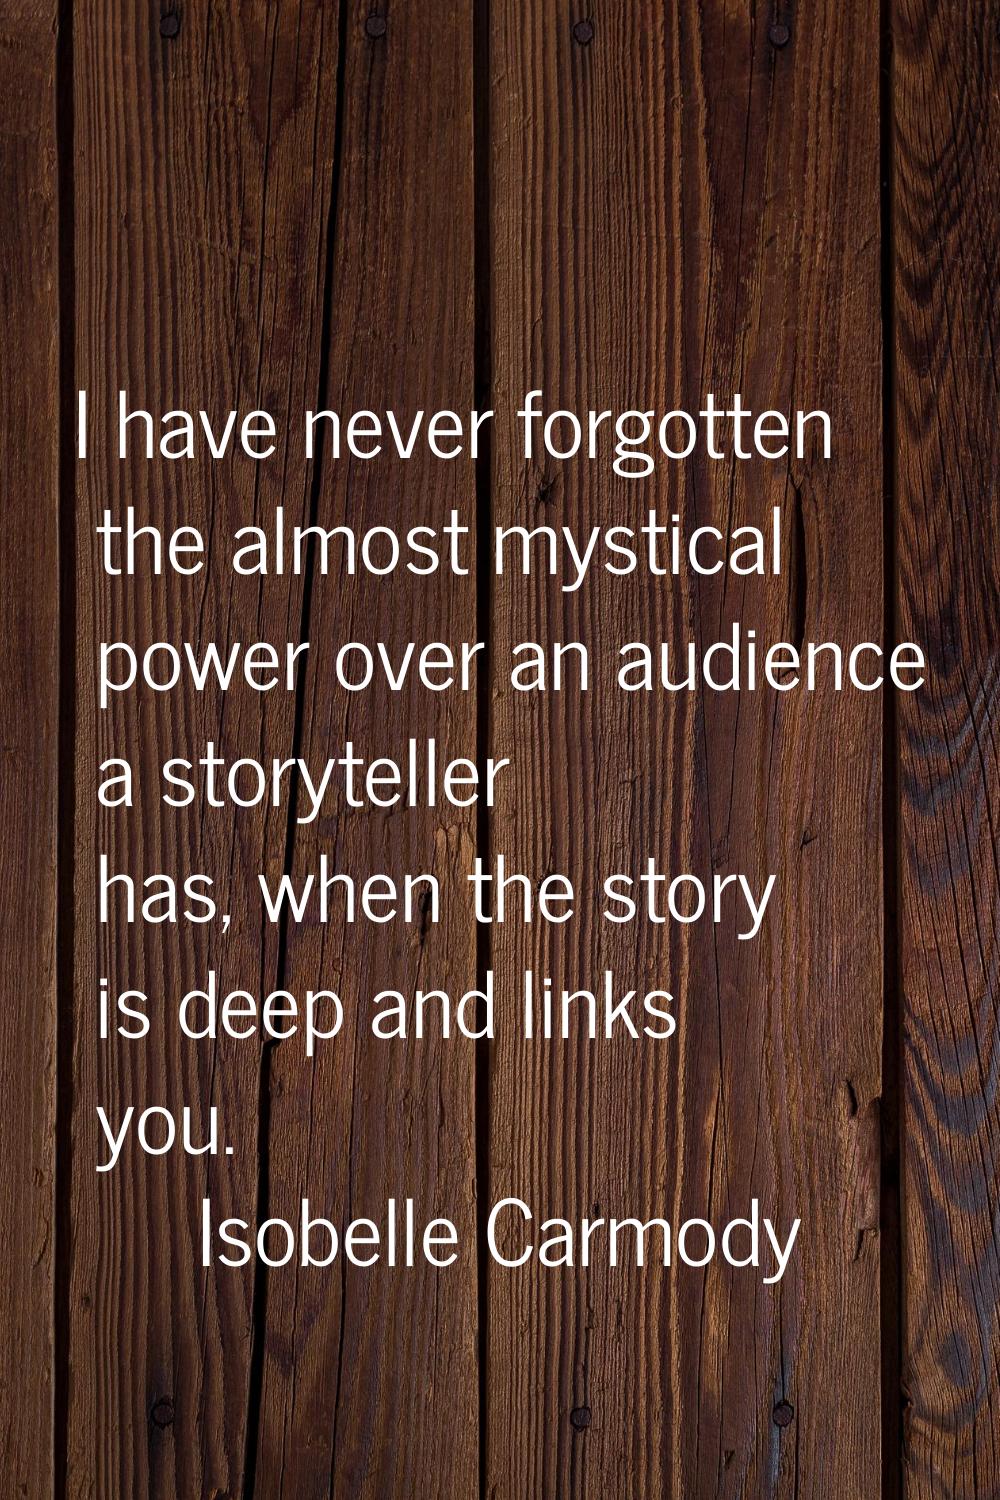 I have never forgotten the almost mystical power over an audience a storyteller has, when the story